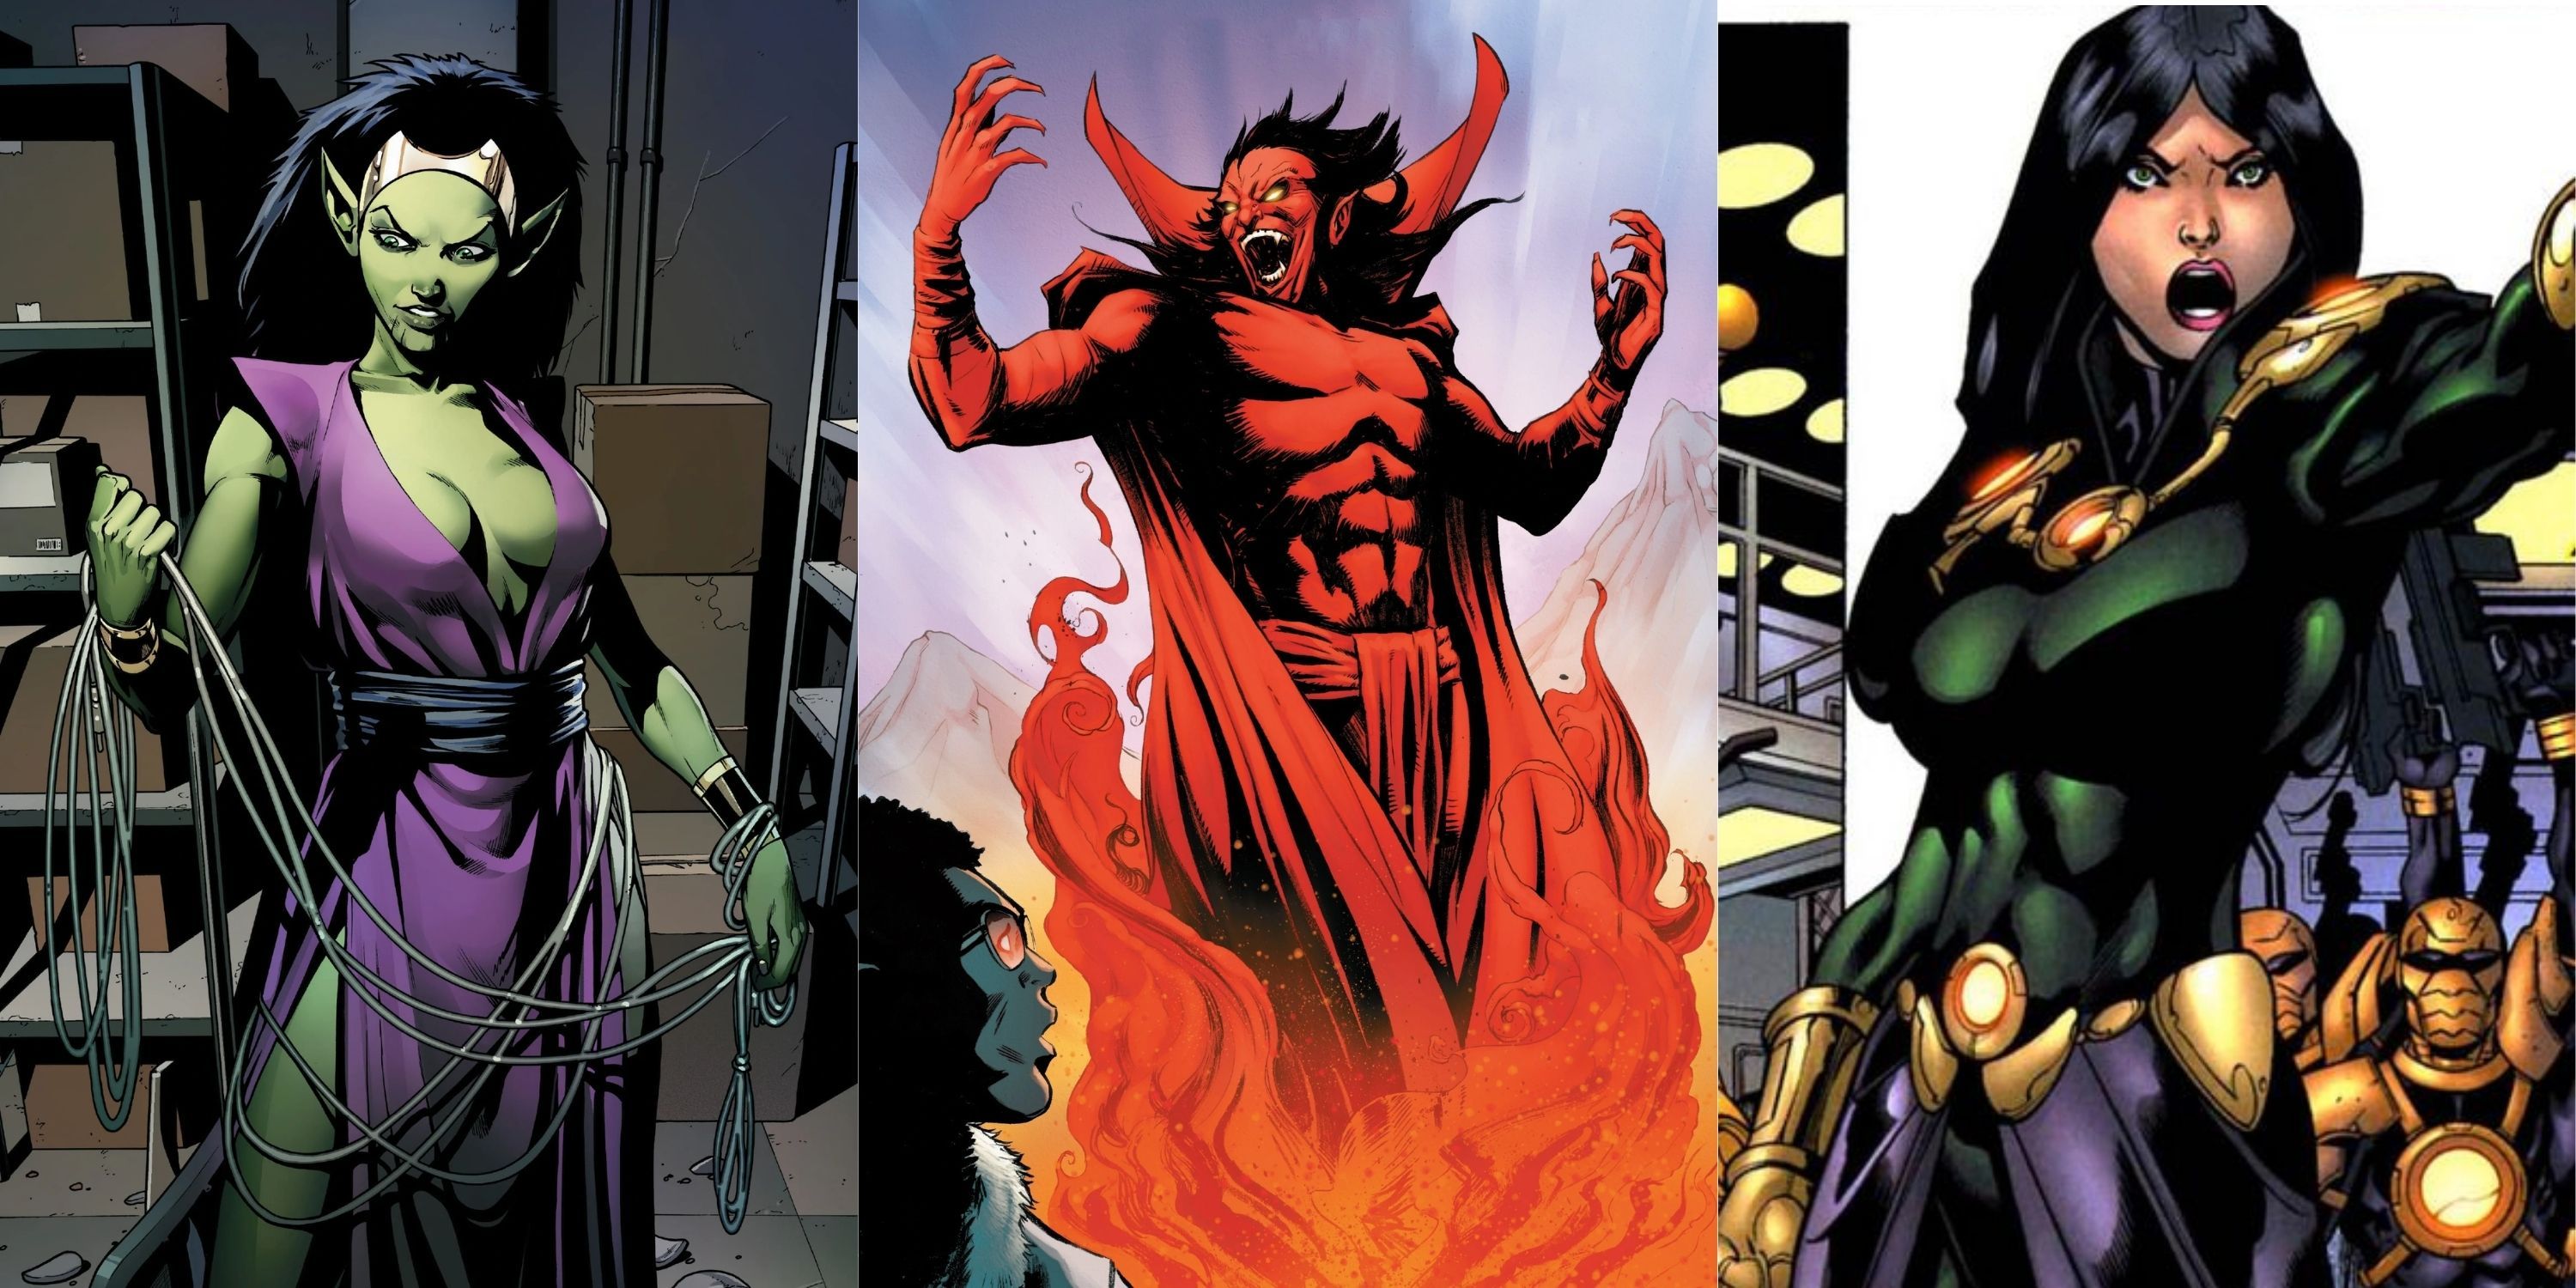 Major Marvel villains yet to appear in the MCU